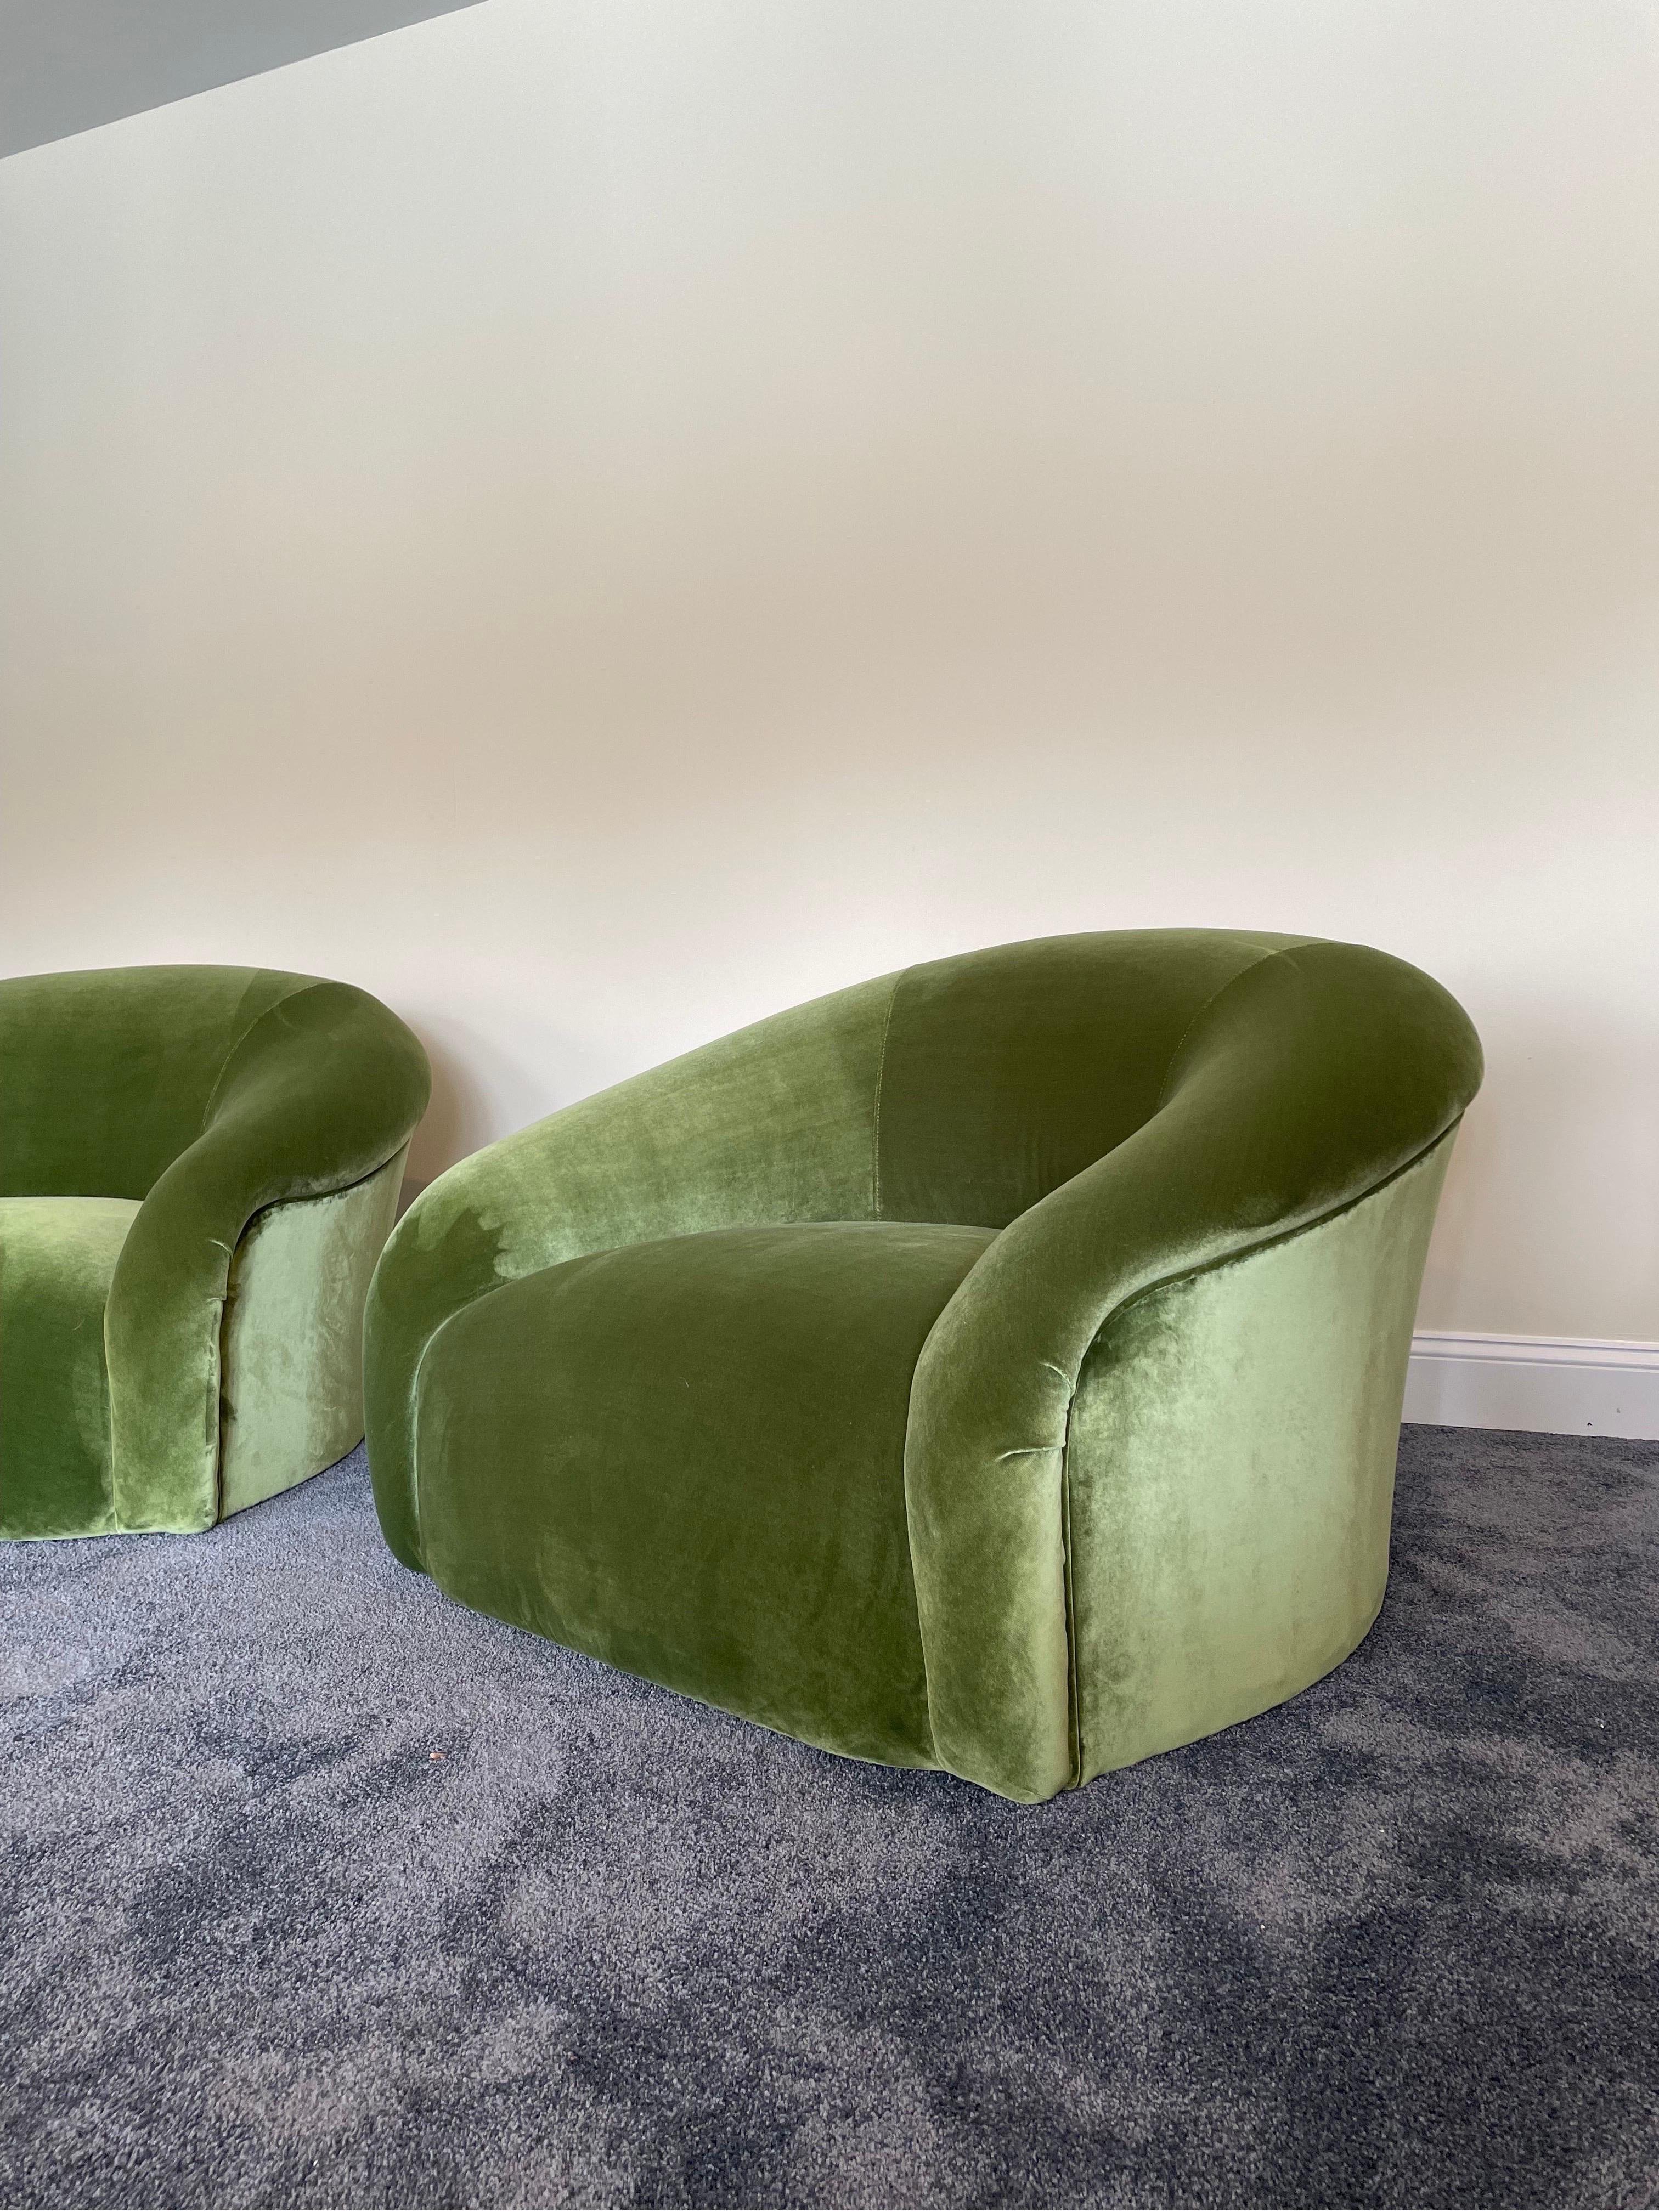 American Vintage Oversized Tub Chairs by Sally Sirkin Lewis for J Robert Scott- a Pair For Sale